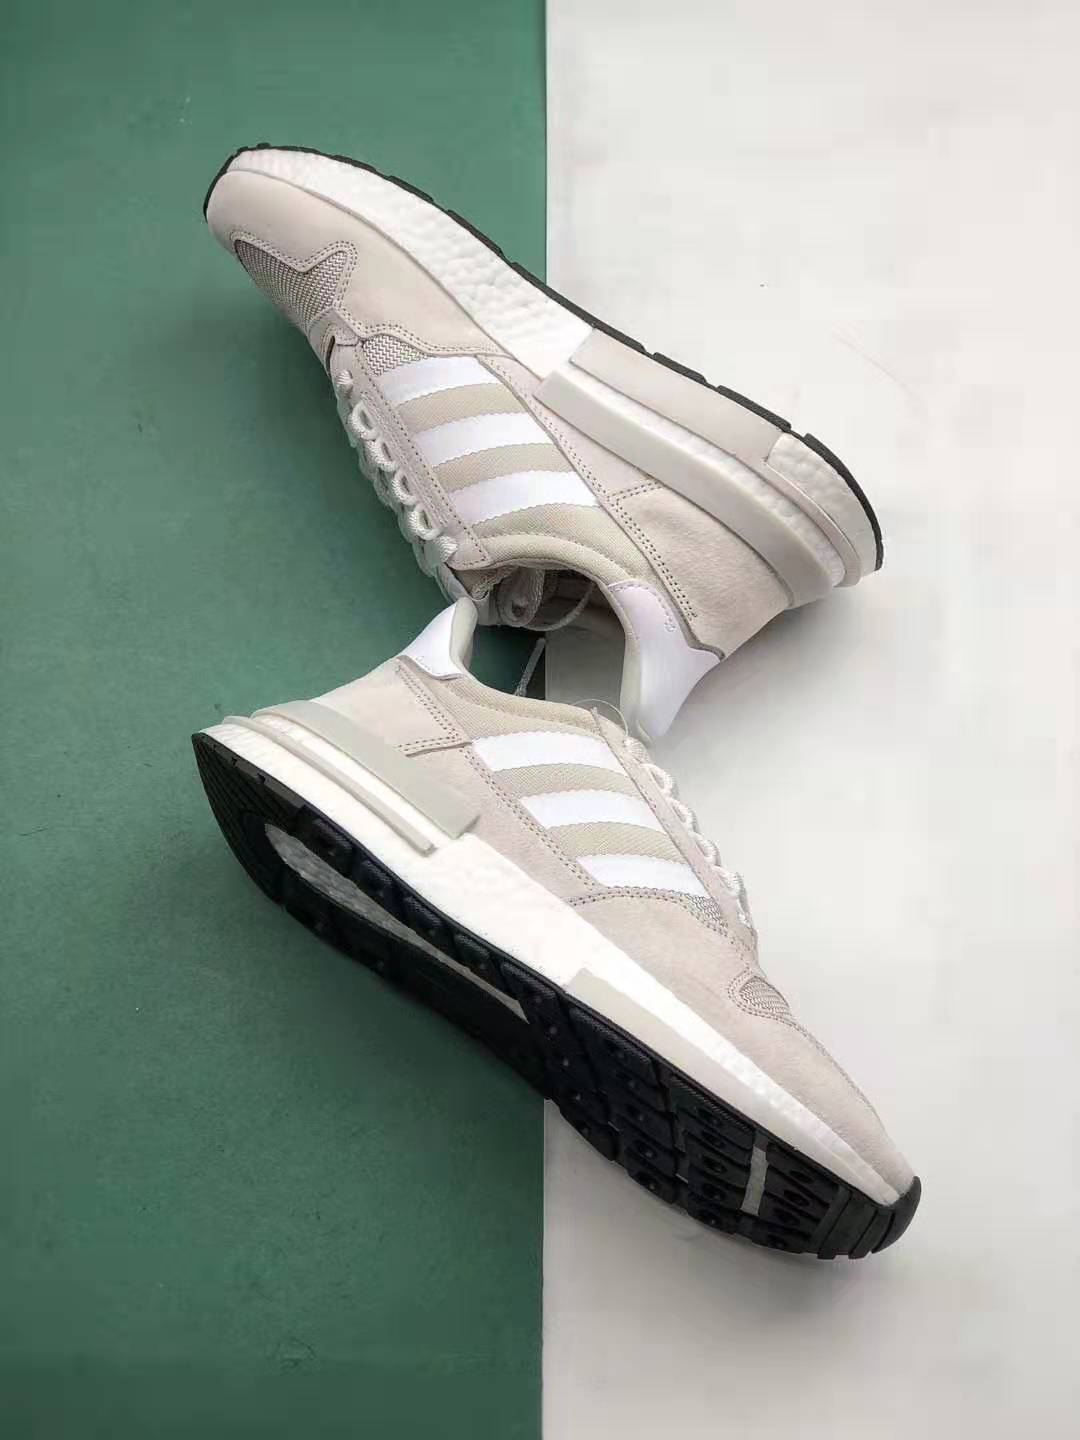 Adidas ZX 500 RM 'Running White' B42226 - Stylish & Comfortable Sneakers